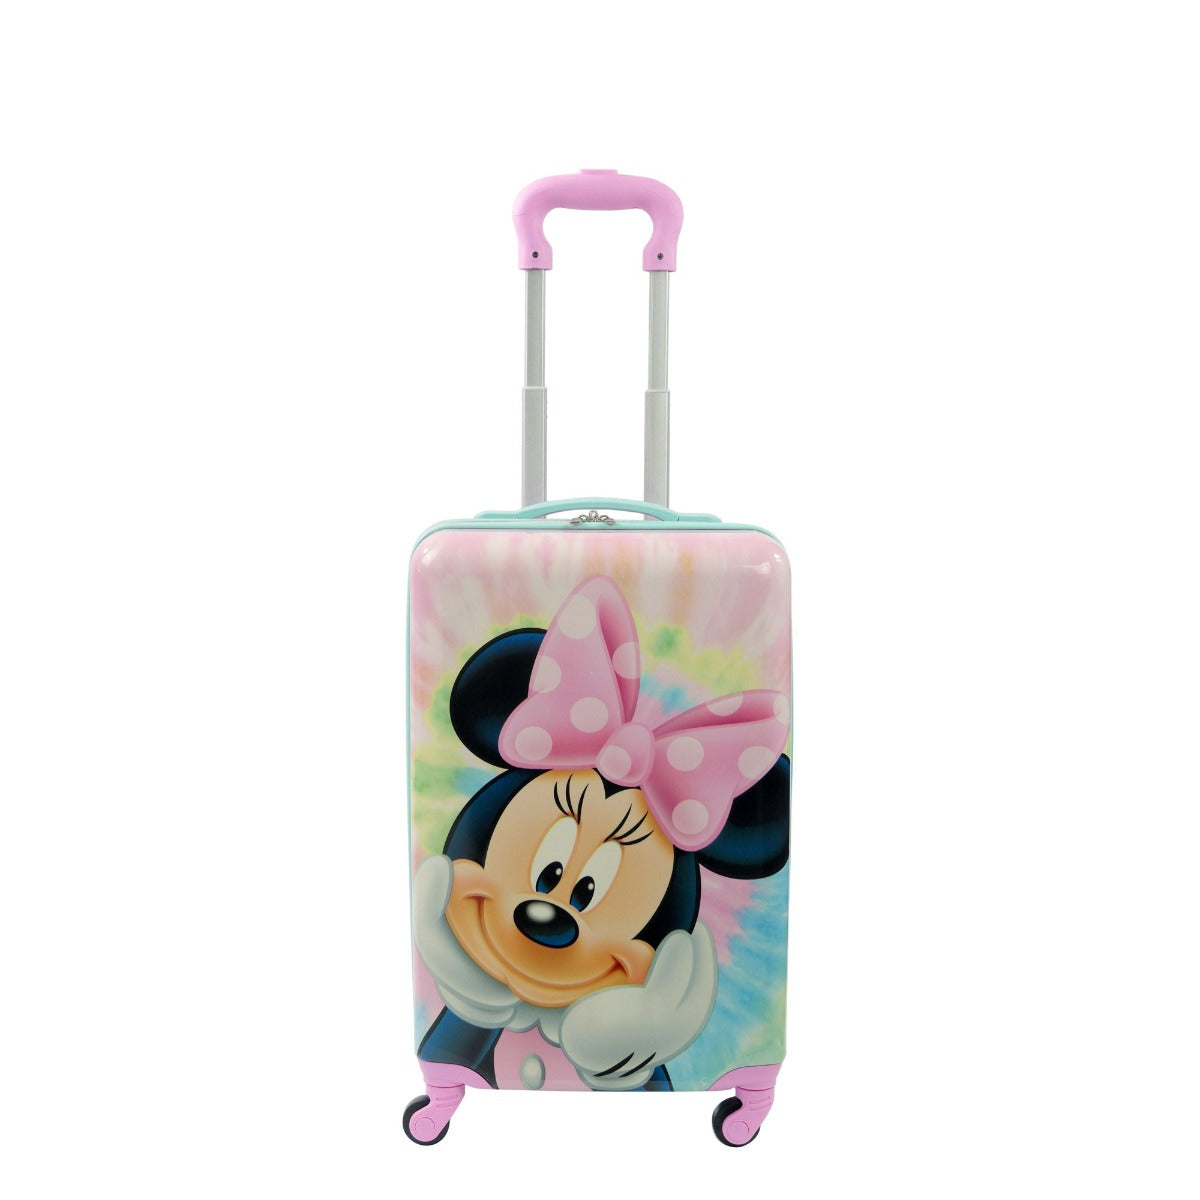 Ful Disney minnie mouse tye dye kids 21" spinner suitcase hardside carry on luggage - kids suitcases for travel